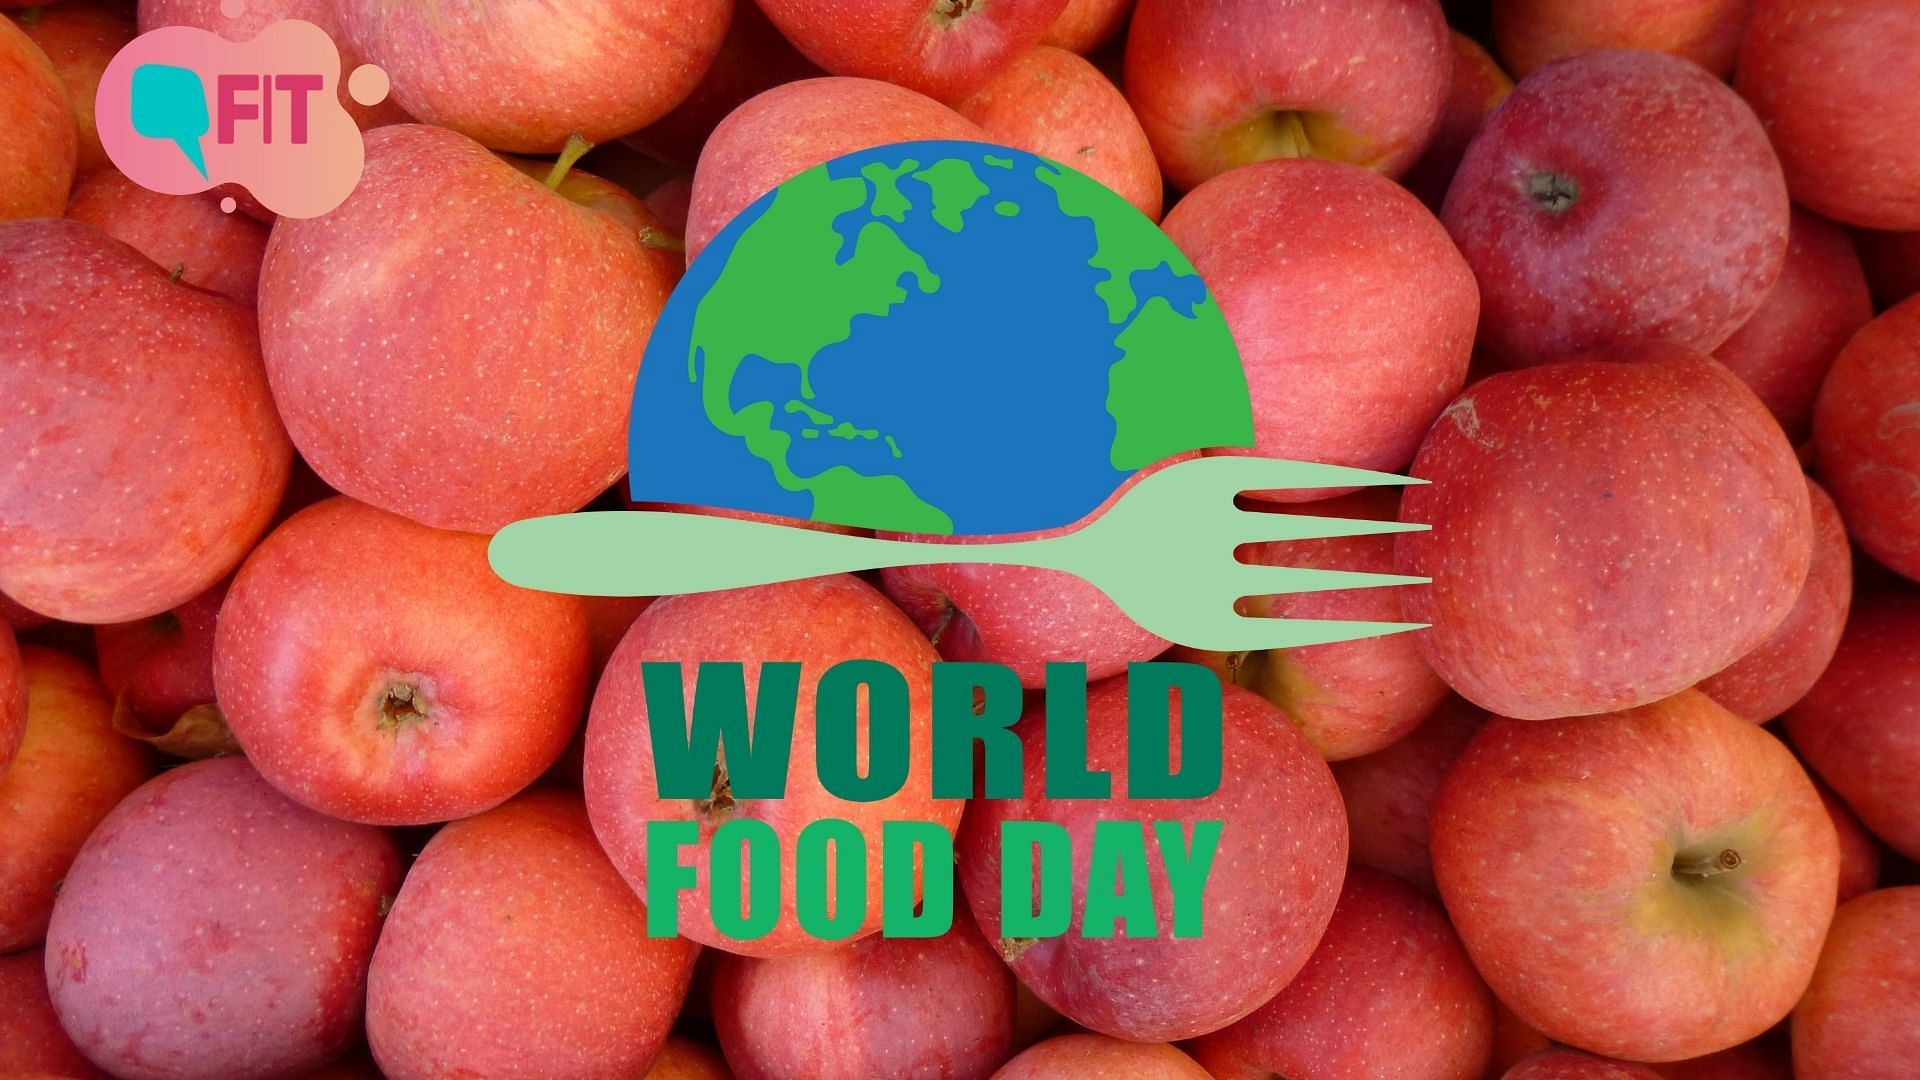 World Food day Quotes, Slogans, Wishes and Posters to raise awareness